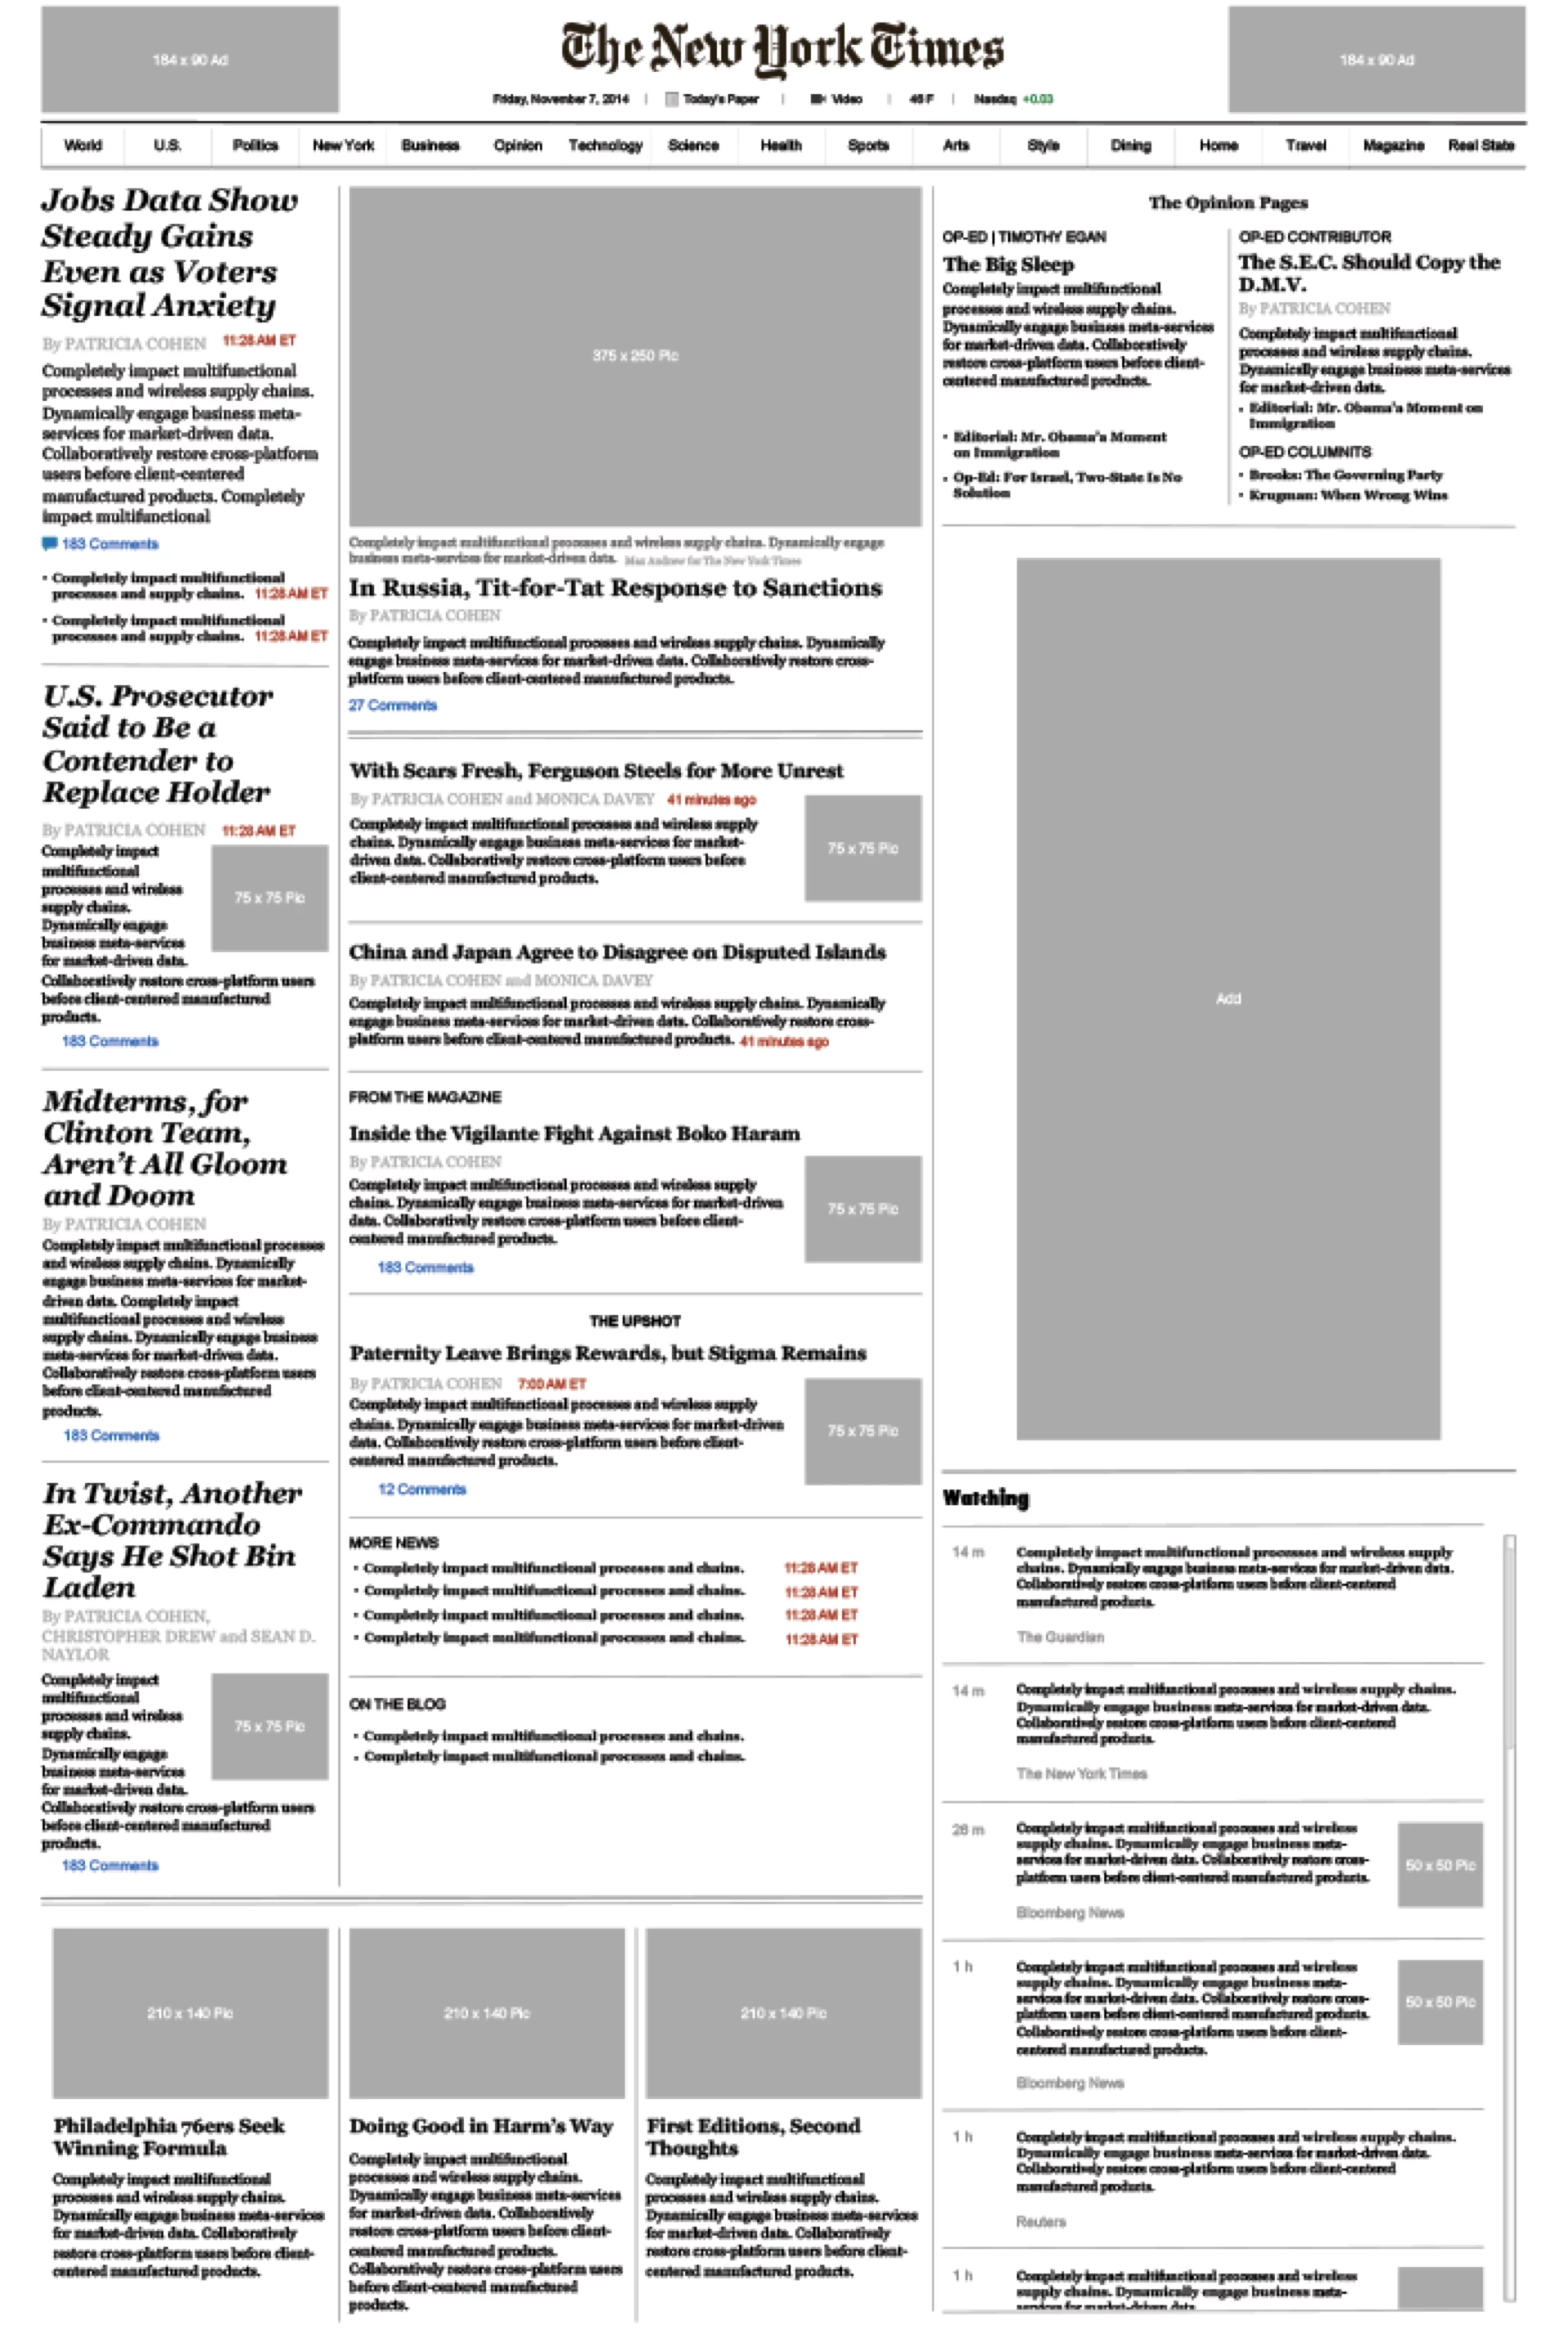 Image of the The New York Time home page wireframe